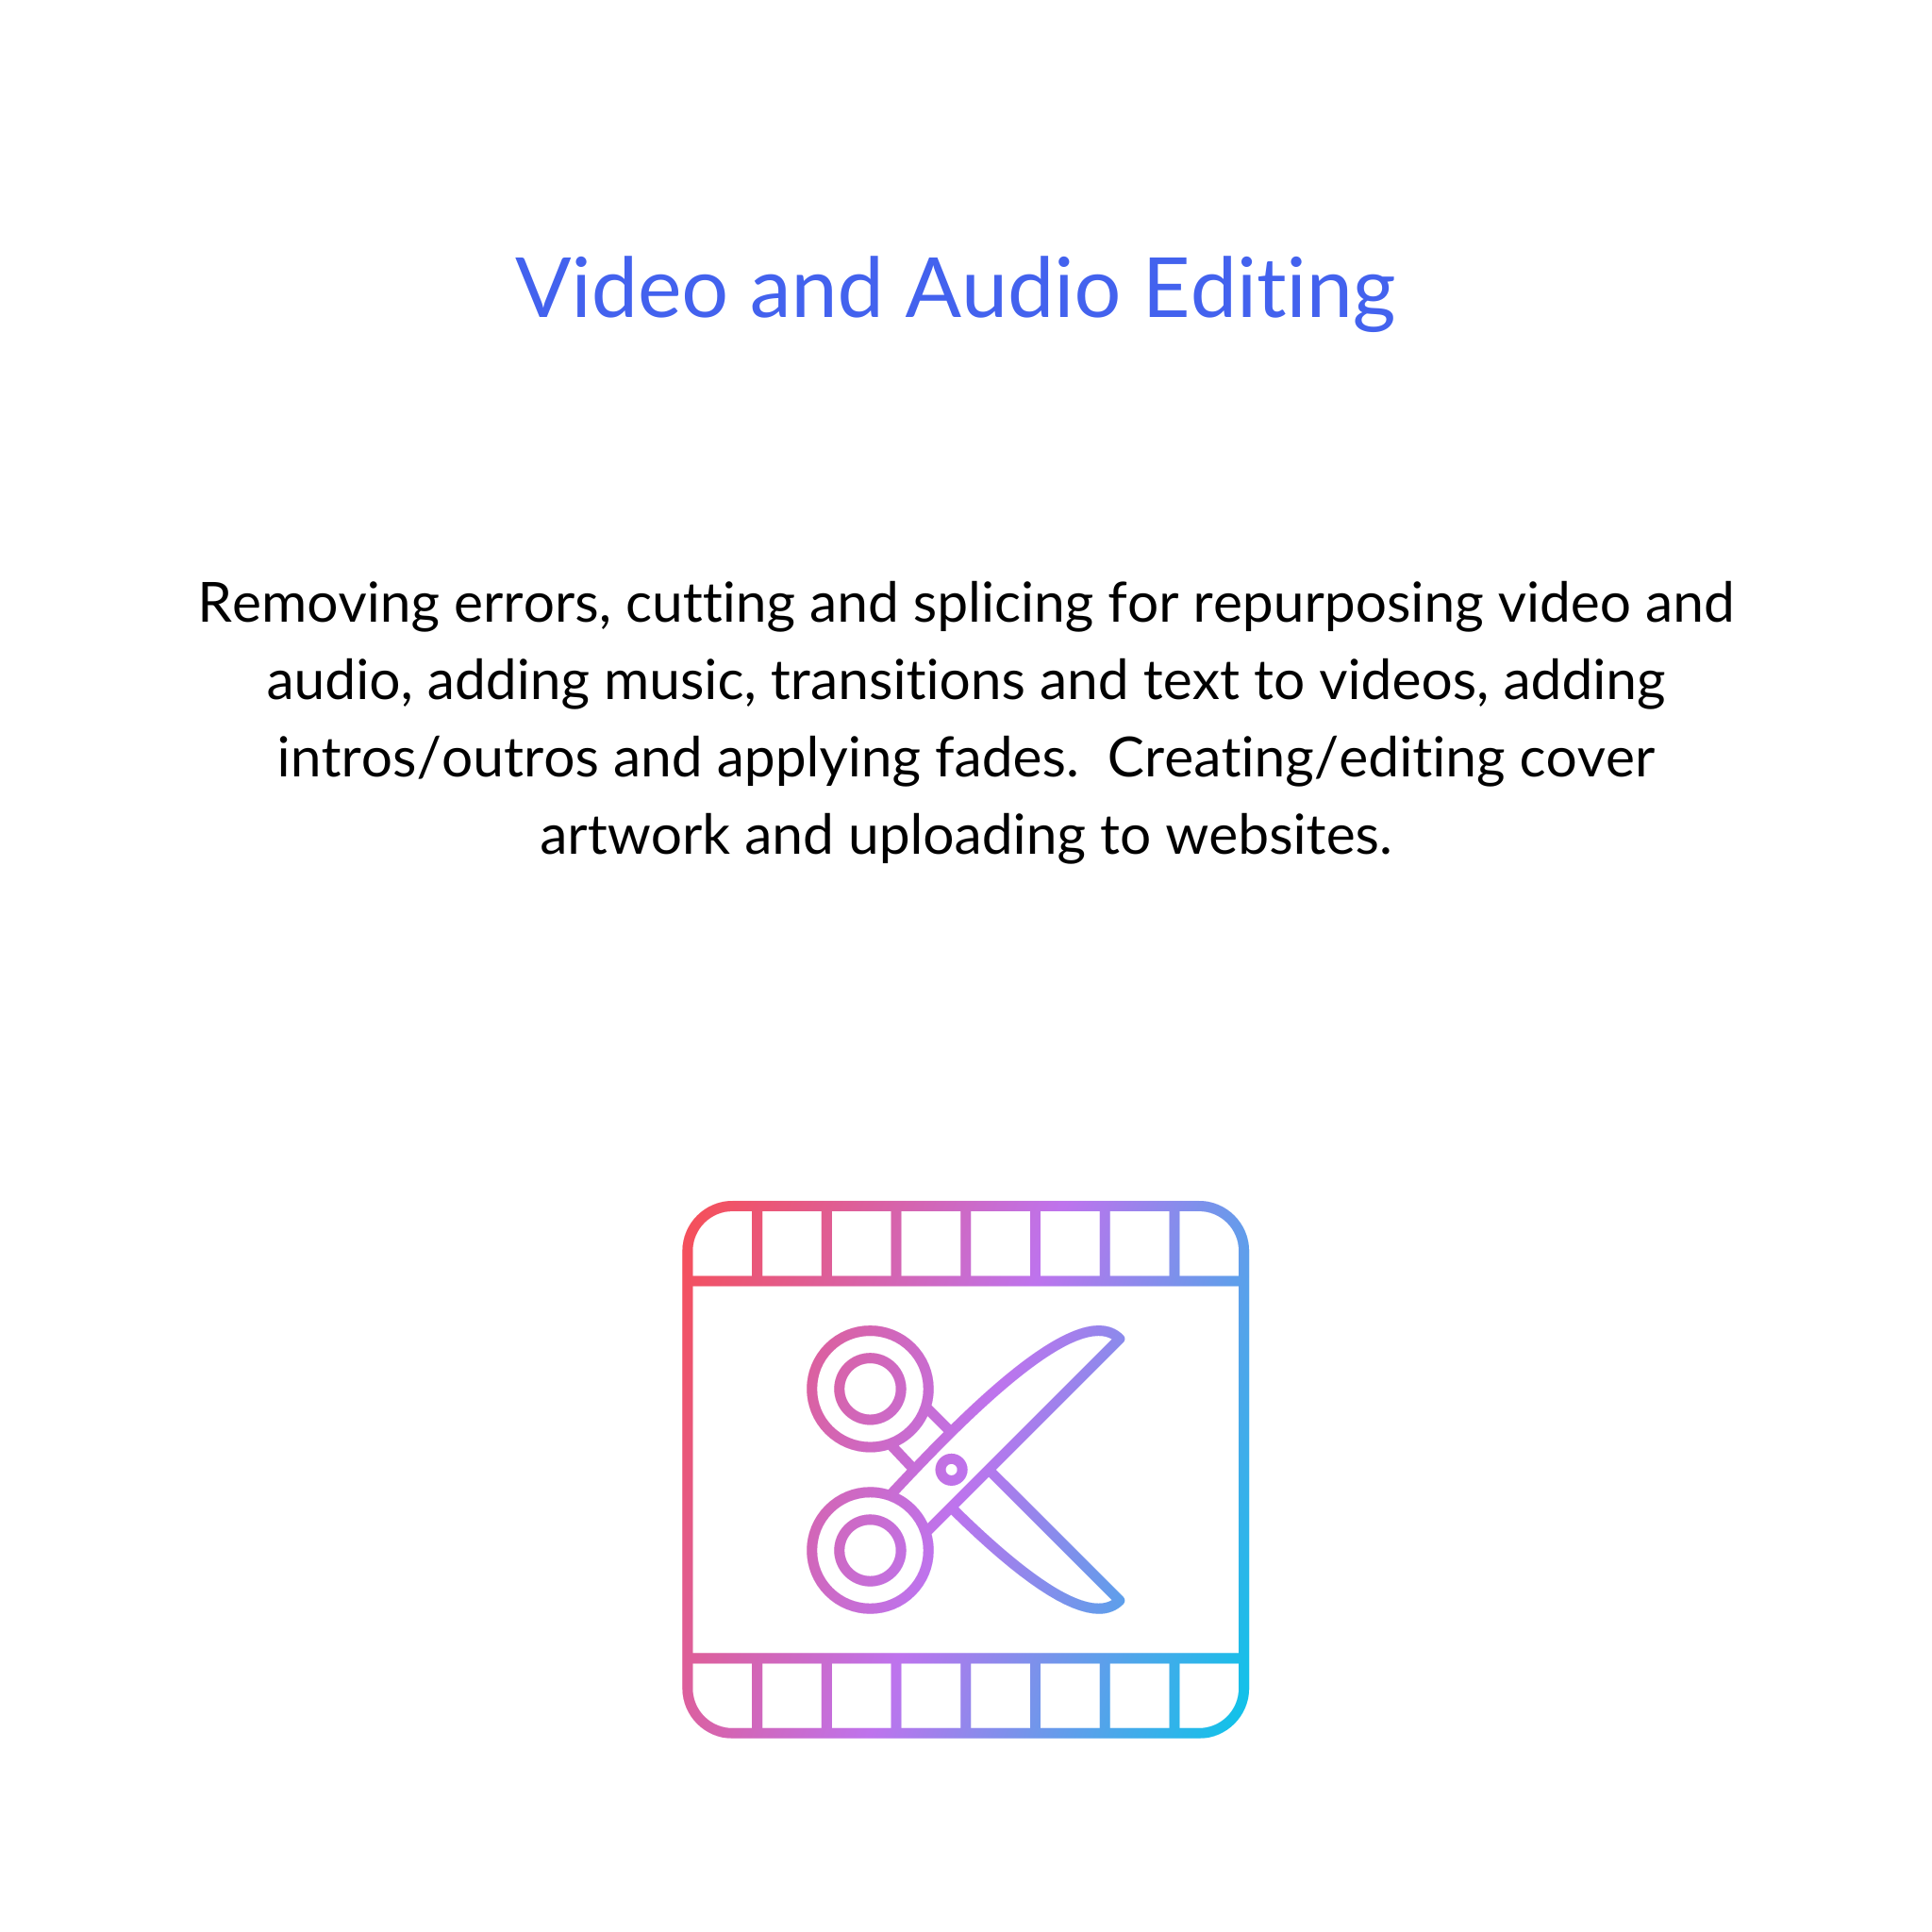 Video and Audio Editing Service - CC Shared Services